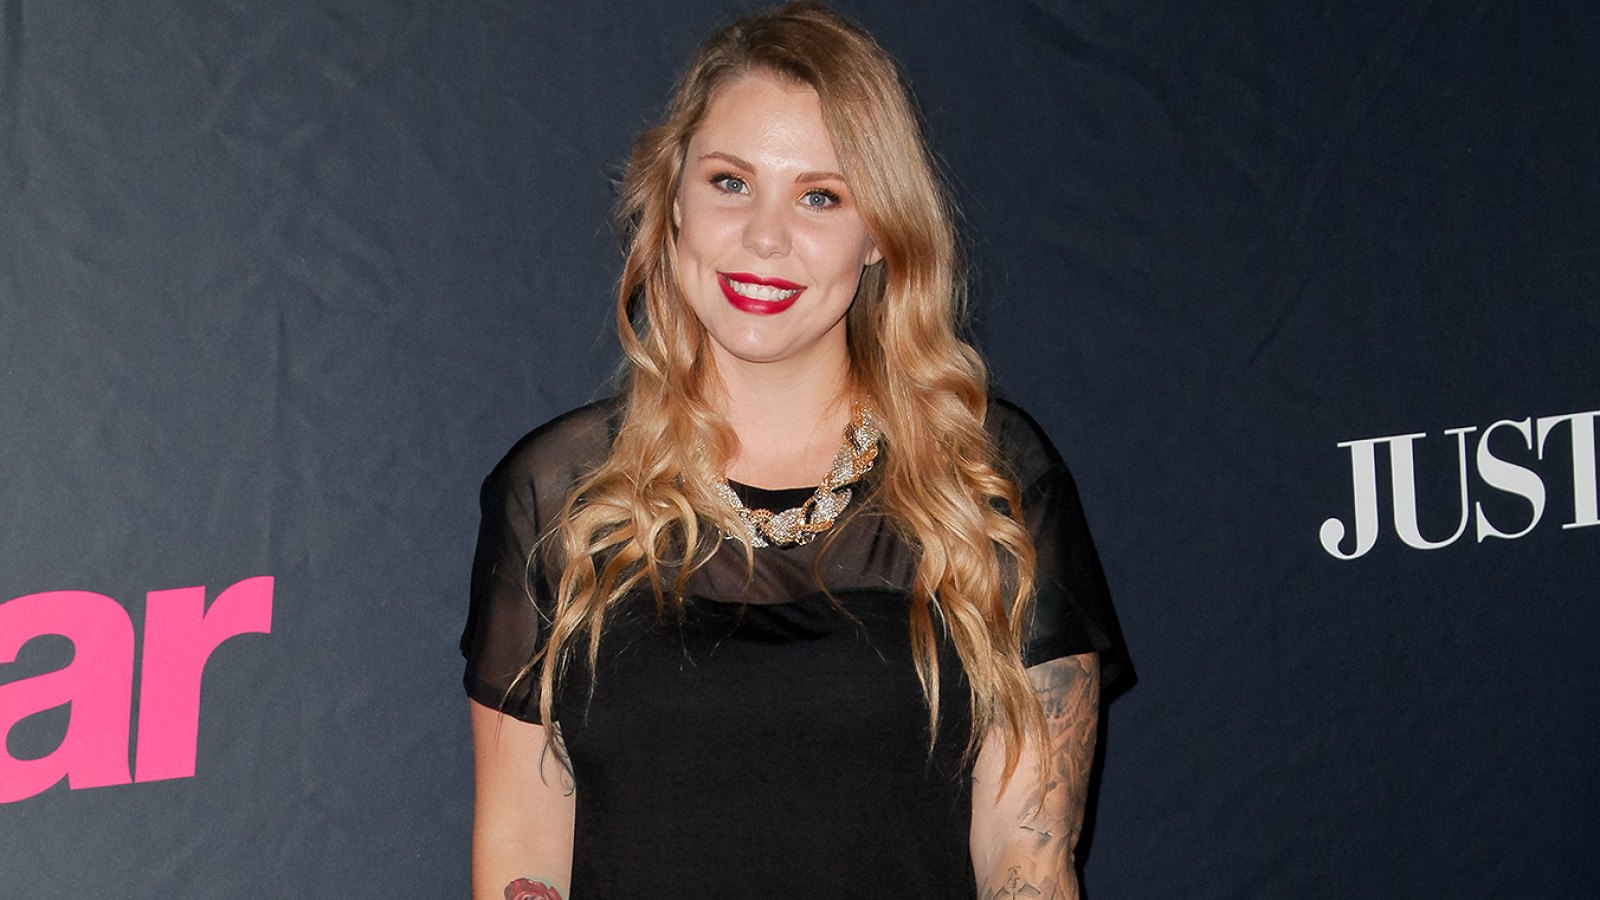 Kailyn Lowry, Dominique Potter, Relationship, Cheating